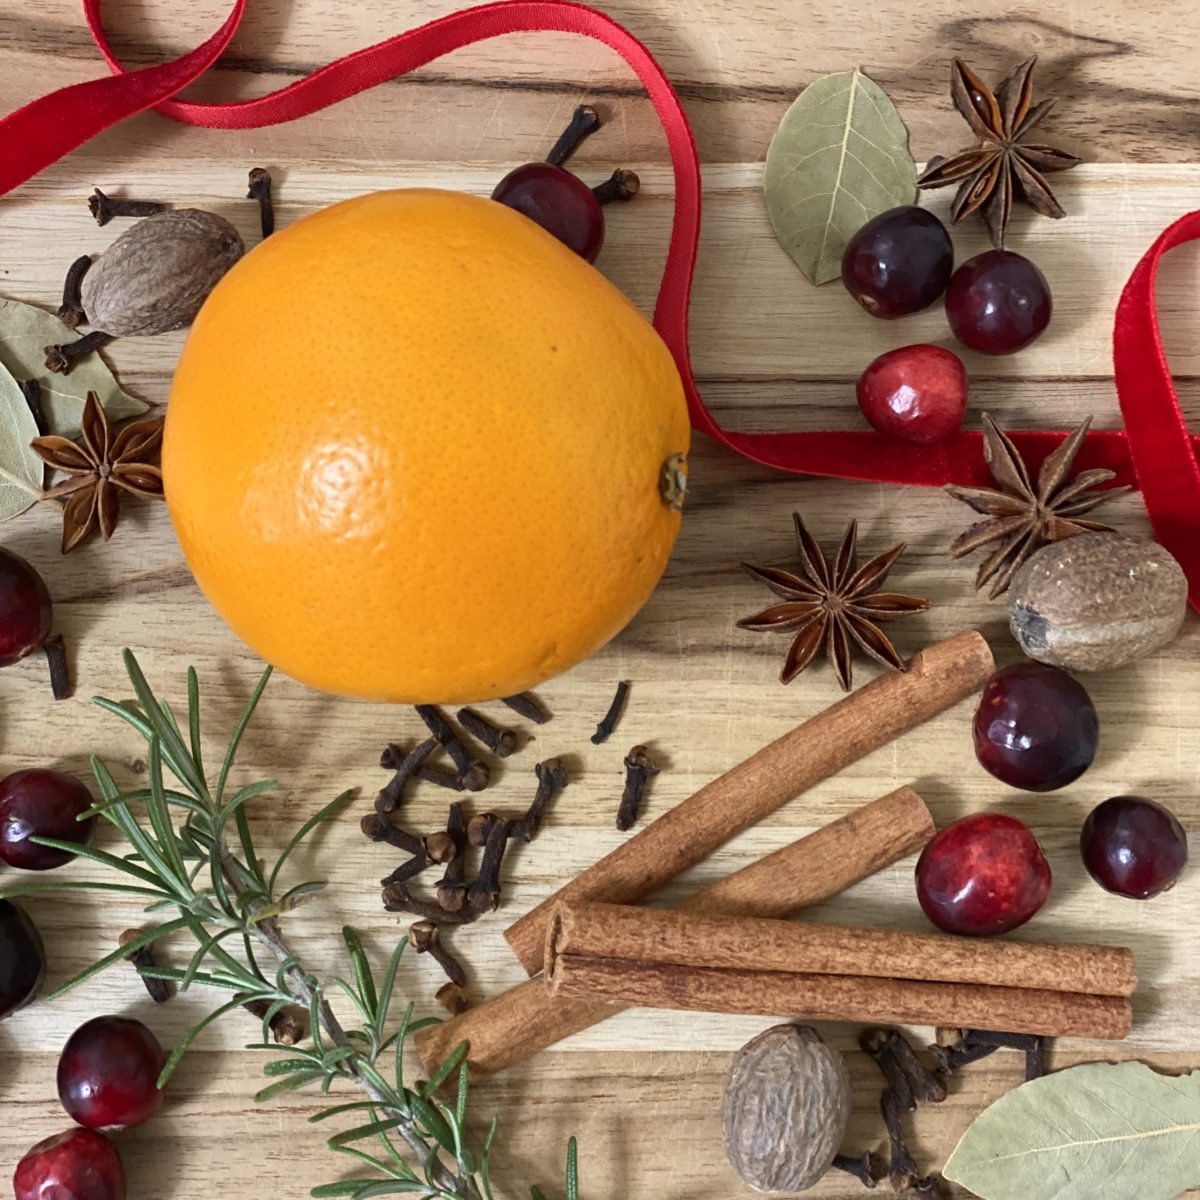 Ingredients for a DIY simmer pot gift including an orange, cinnamon sticks, cranberries, cloves, nutmeg, bay leaves, rosemary, and red ribbon.